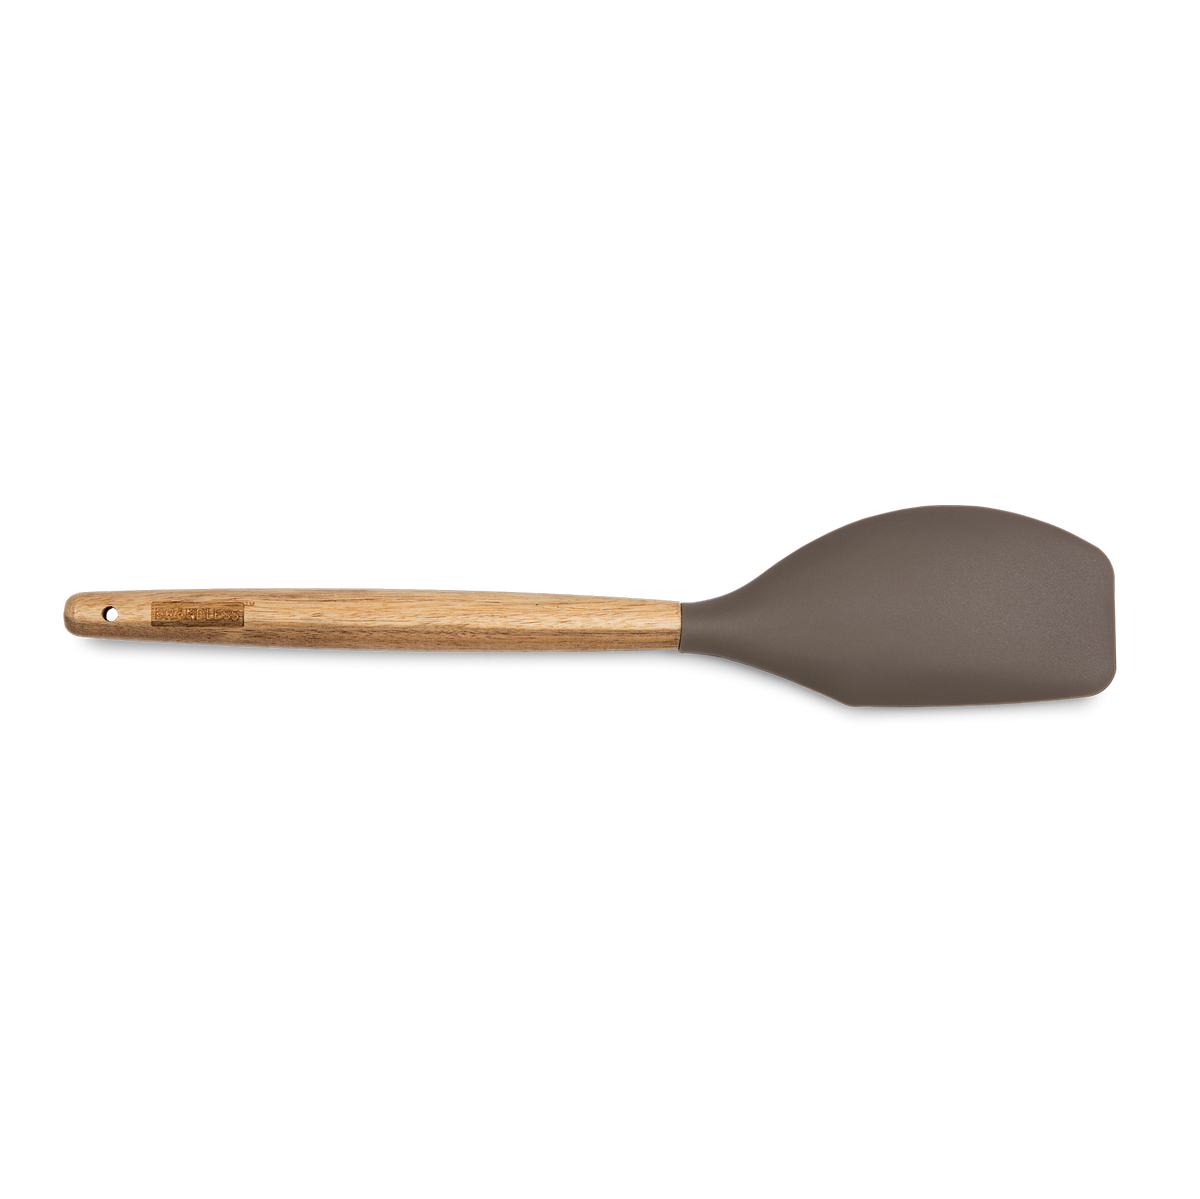 Product photo, silicone spatula, side view